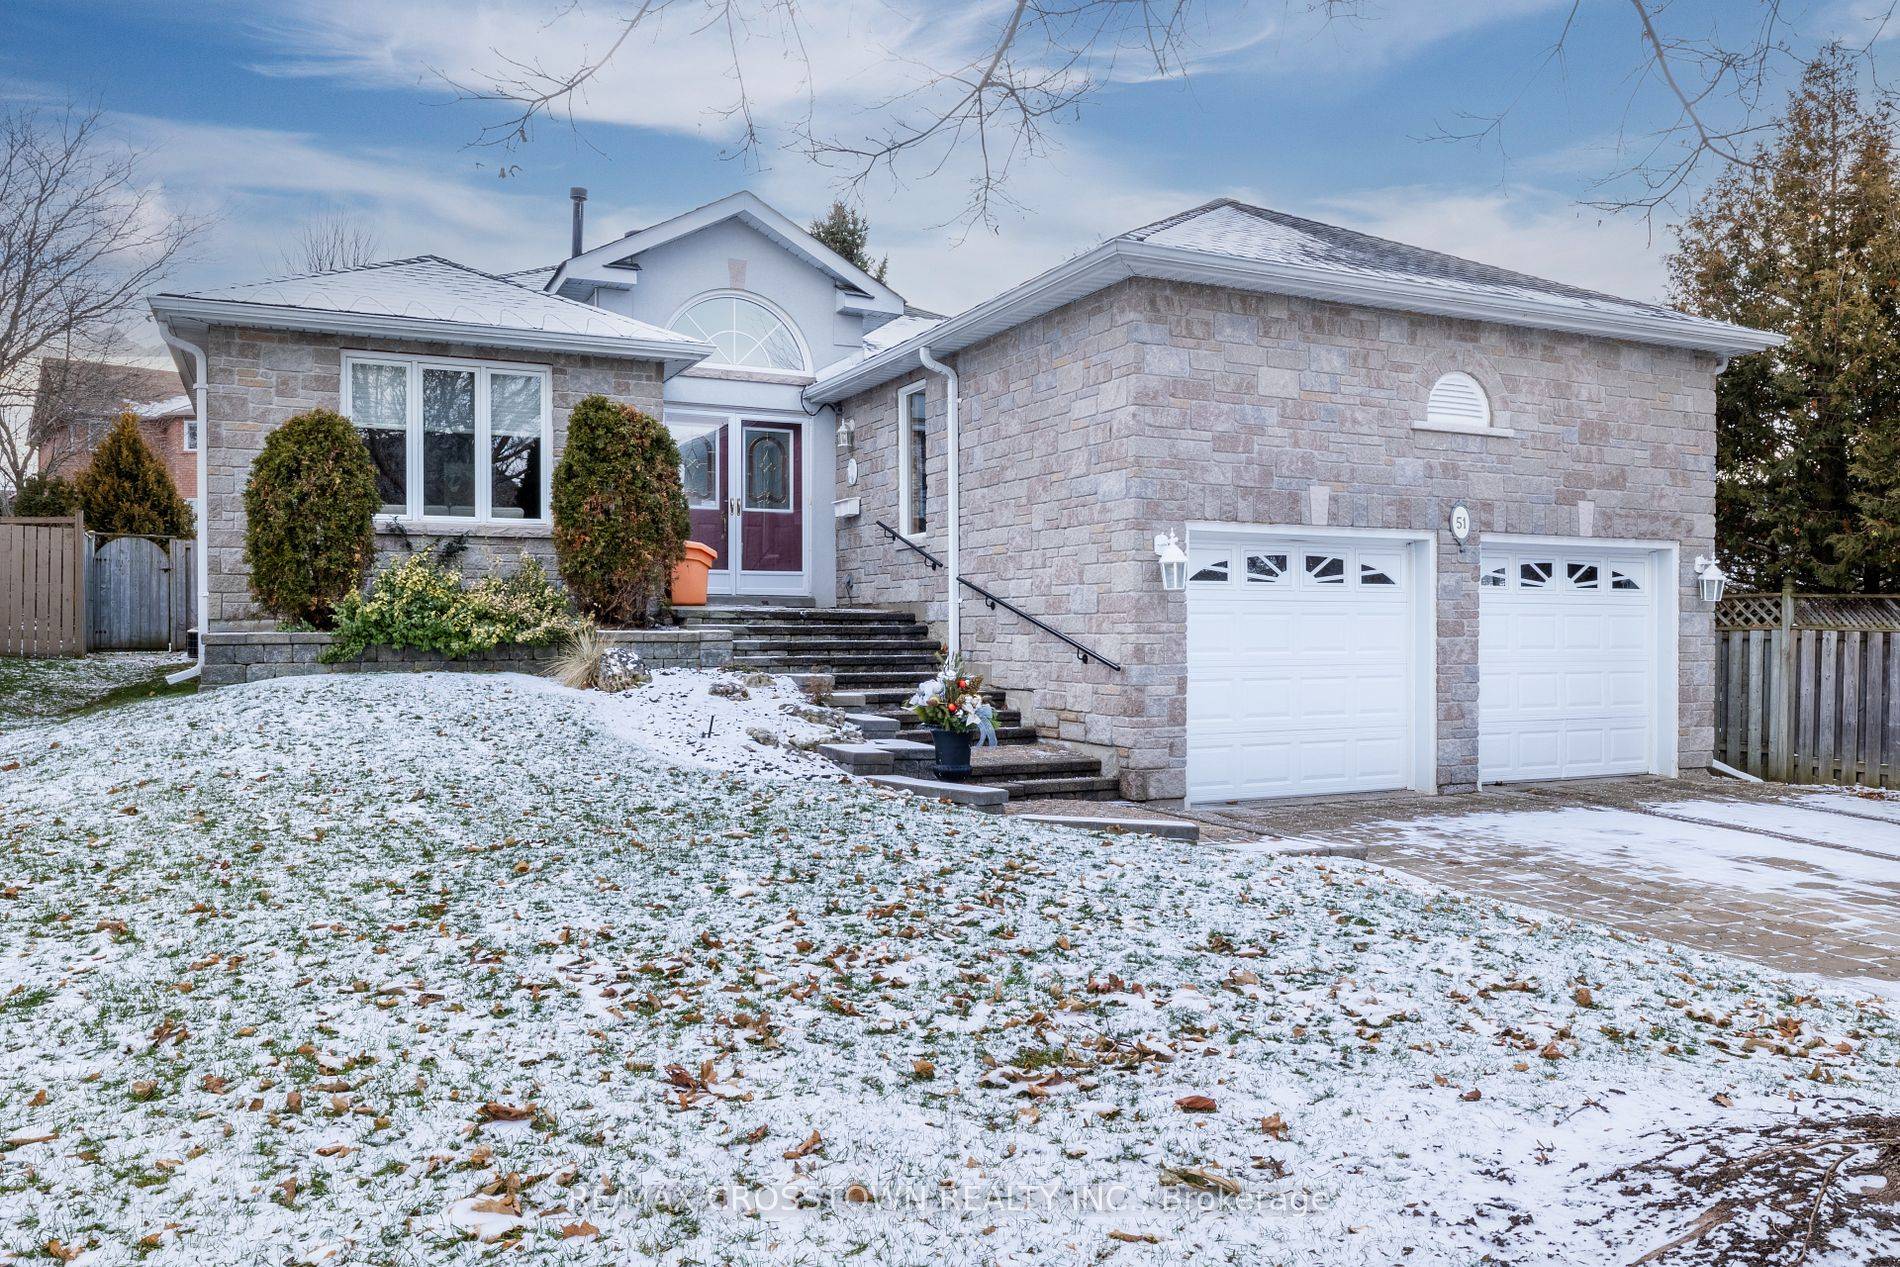 Discover tranquility in this 3 bed, 2 bath, 1728 SF bungalow, nestled in a sought after neighbourhood, with perennial gardens and large picturesque lot.